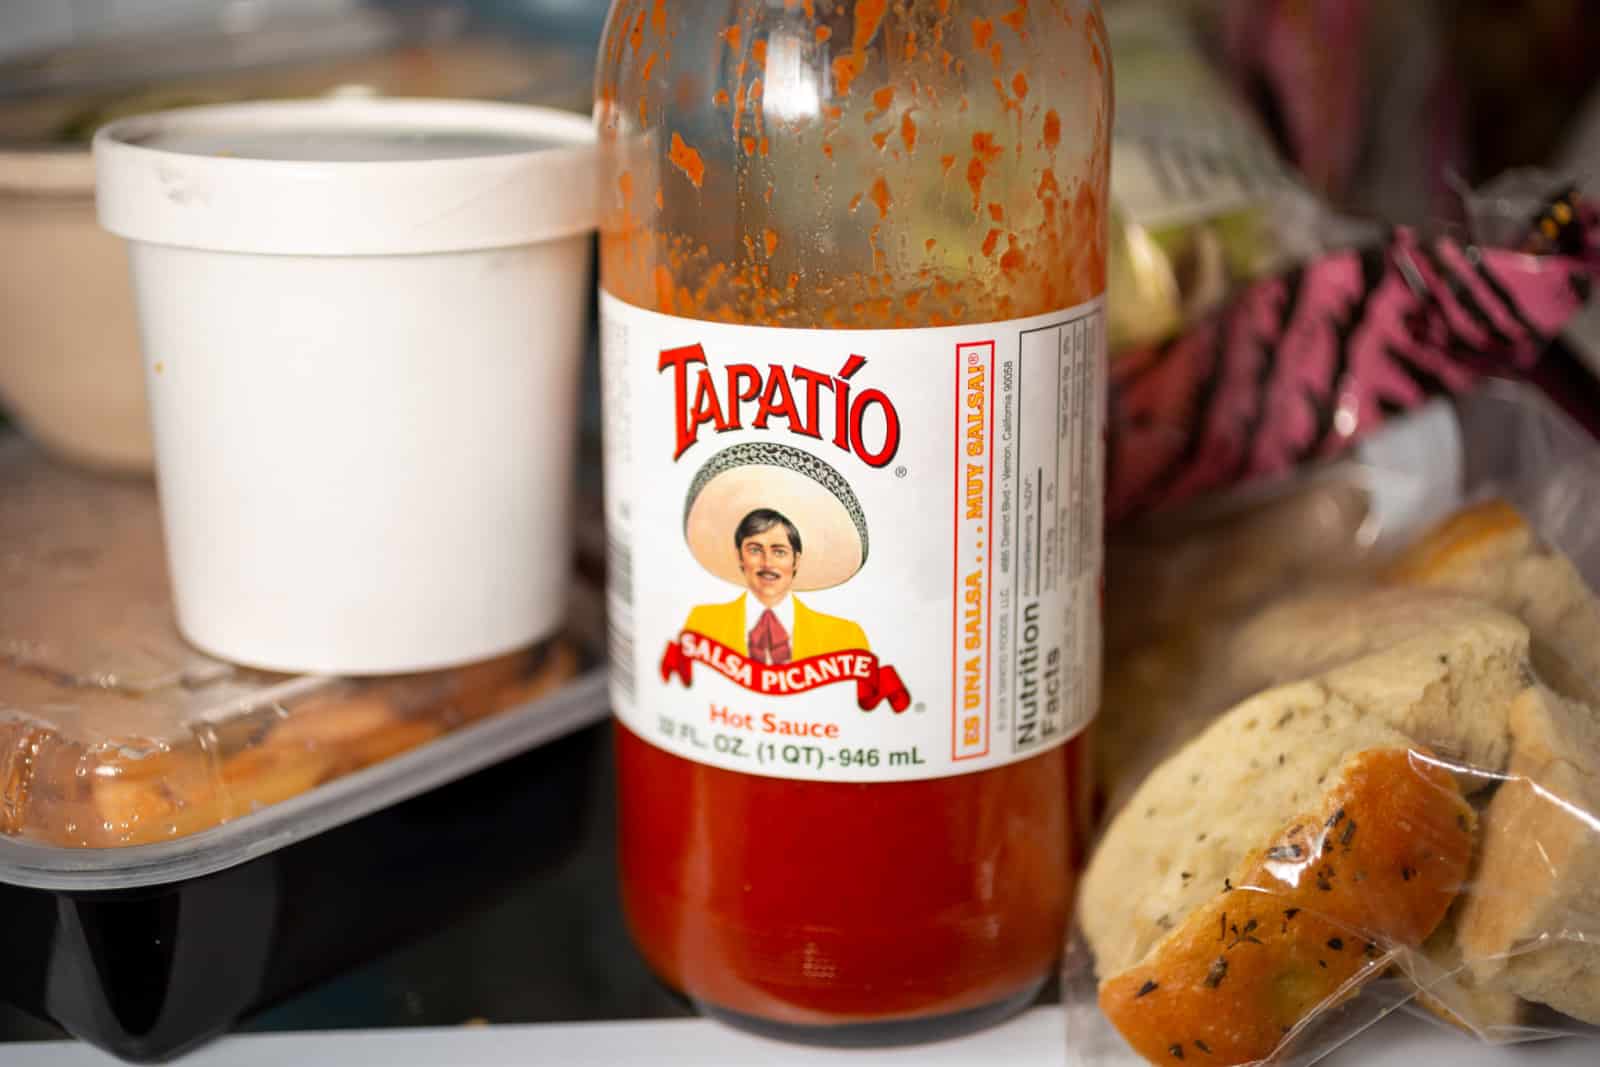 A bottle of Tapatio hot sauce